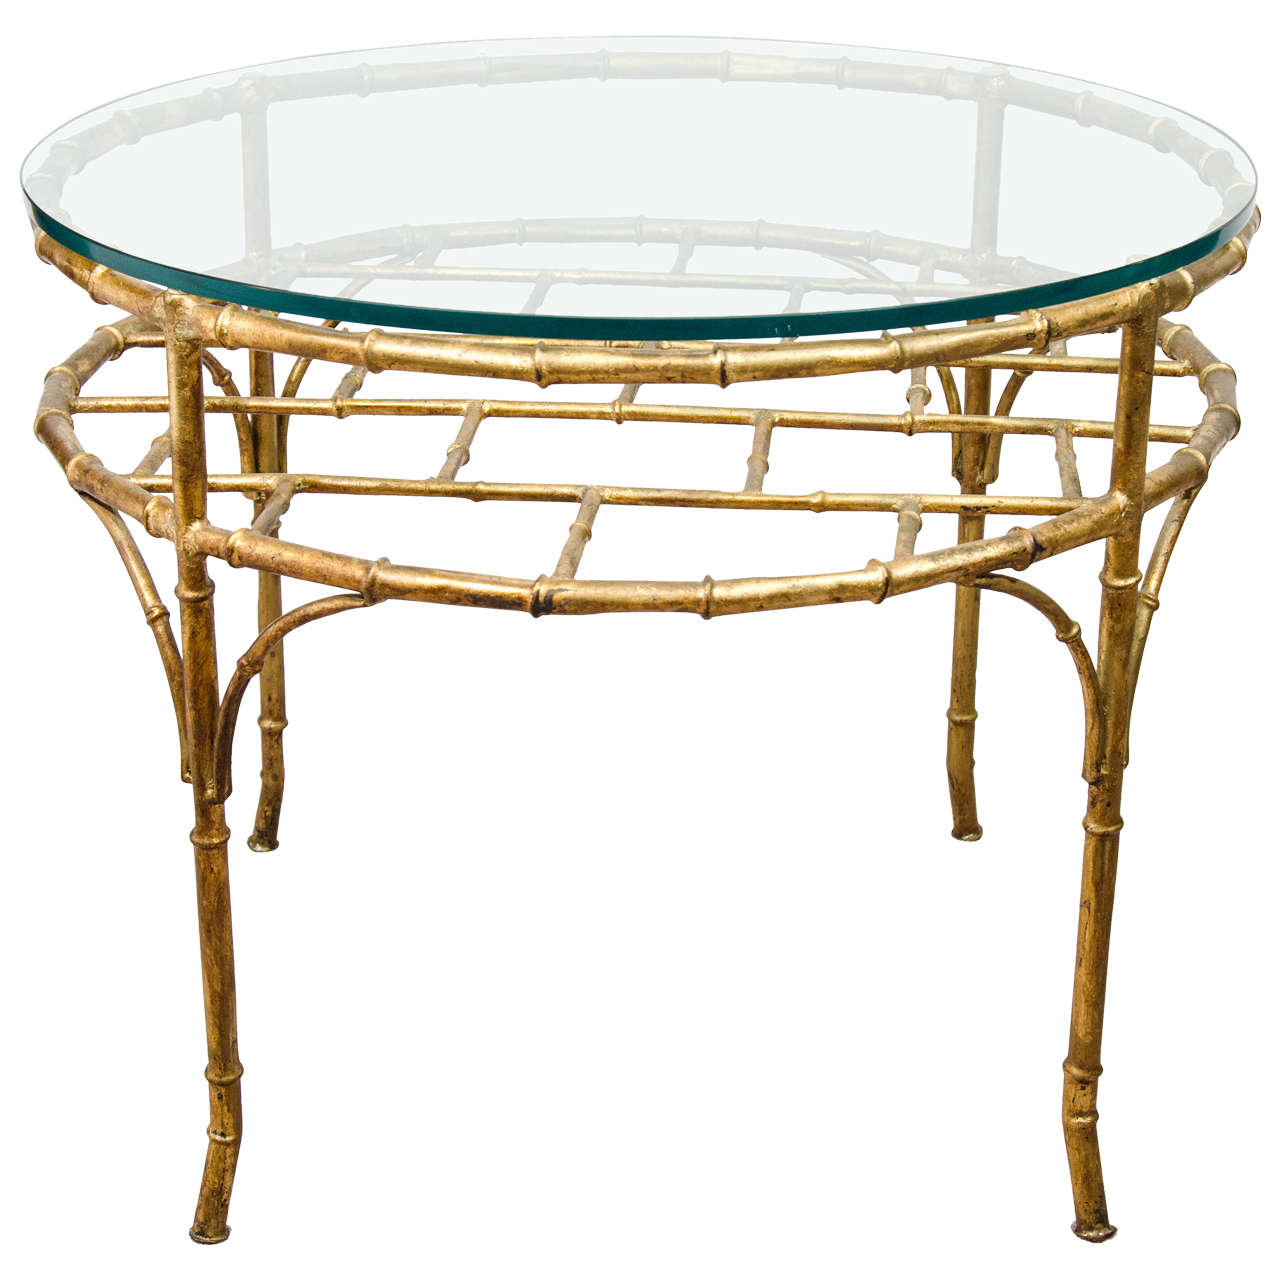 Gilt-metal faux-bamboo occasional table, 1950s